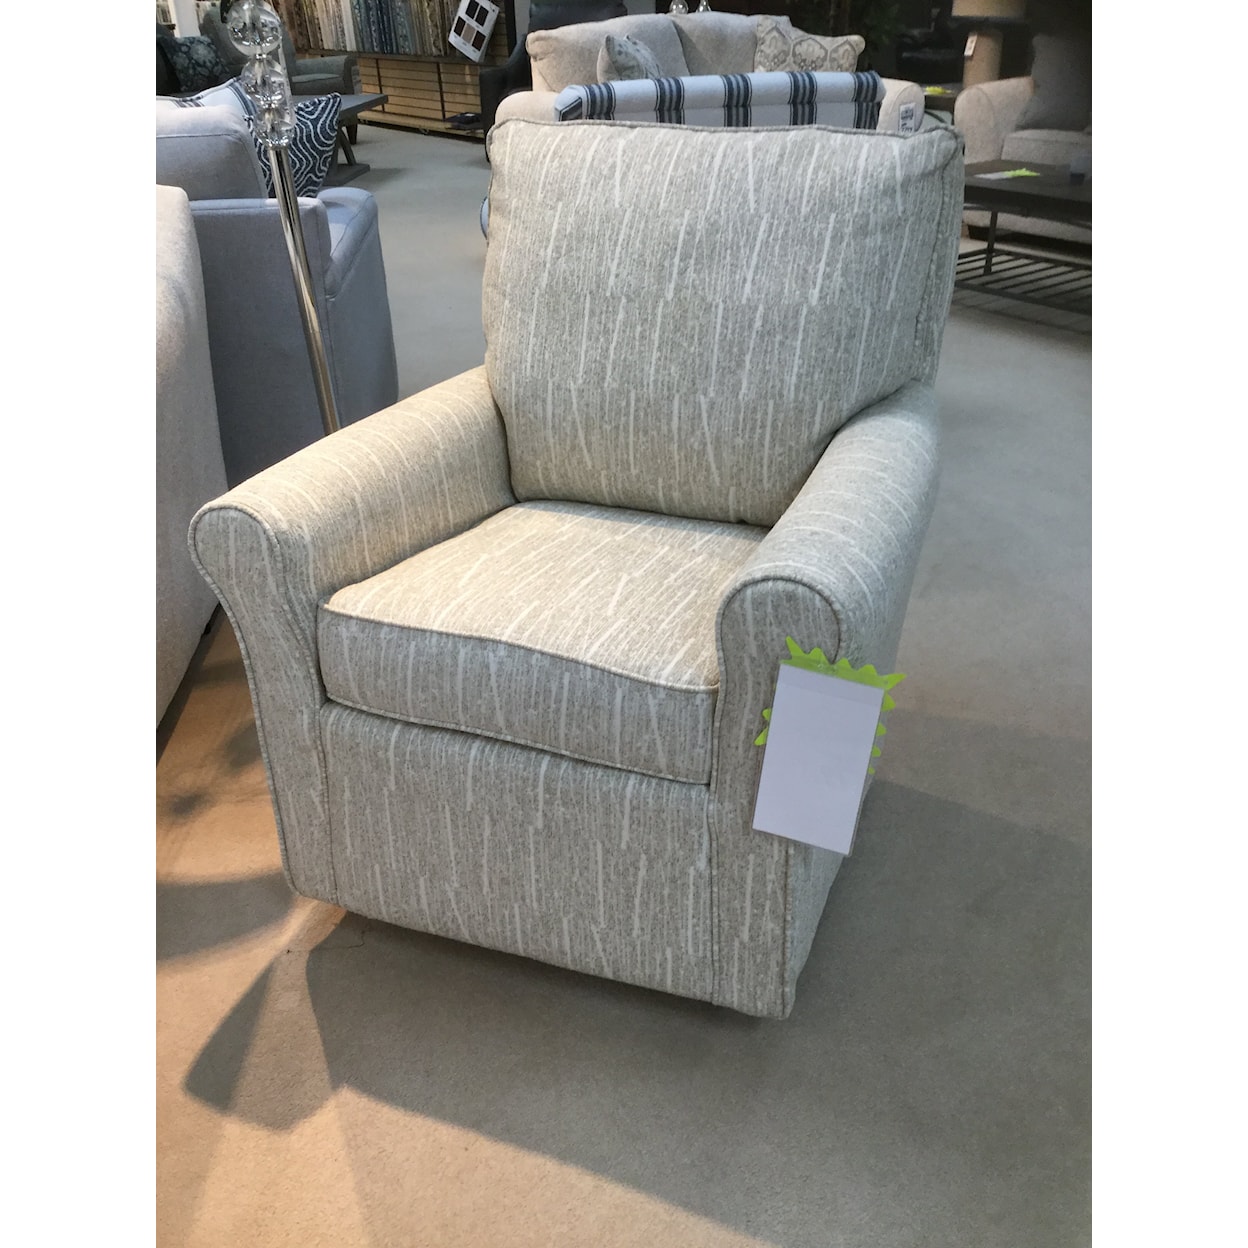 Best Home Furnishings Kacey Upholstered Chairs